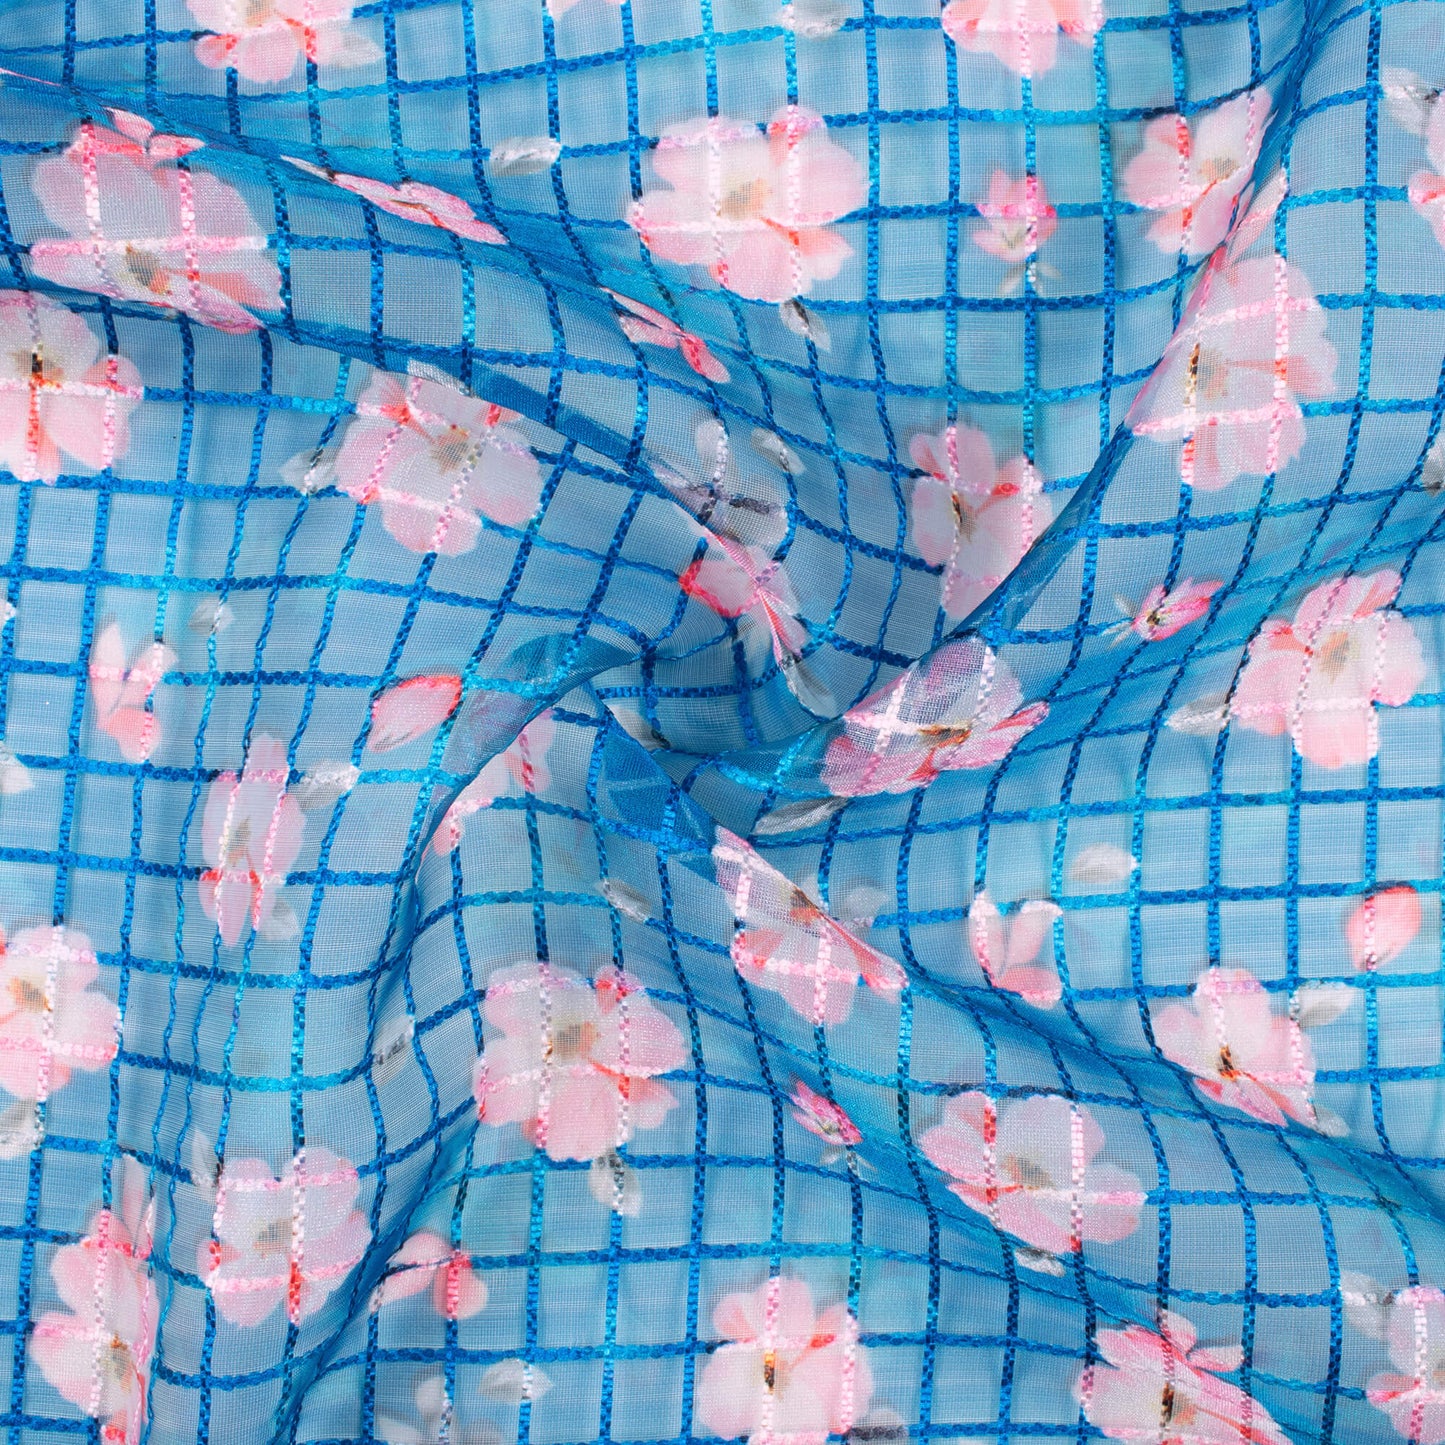 Azure Blue And Taffy Pink Floral Pattern Checks Embroidery Digital Print Organza Tissue Fabric